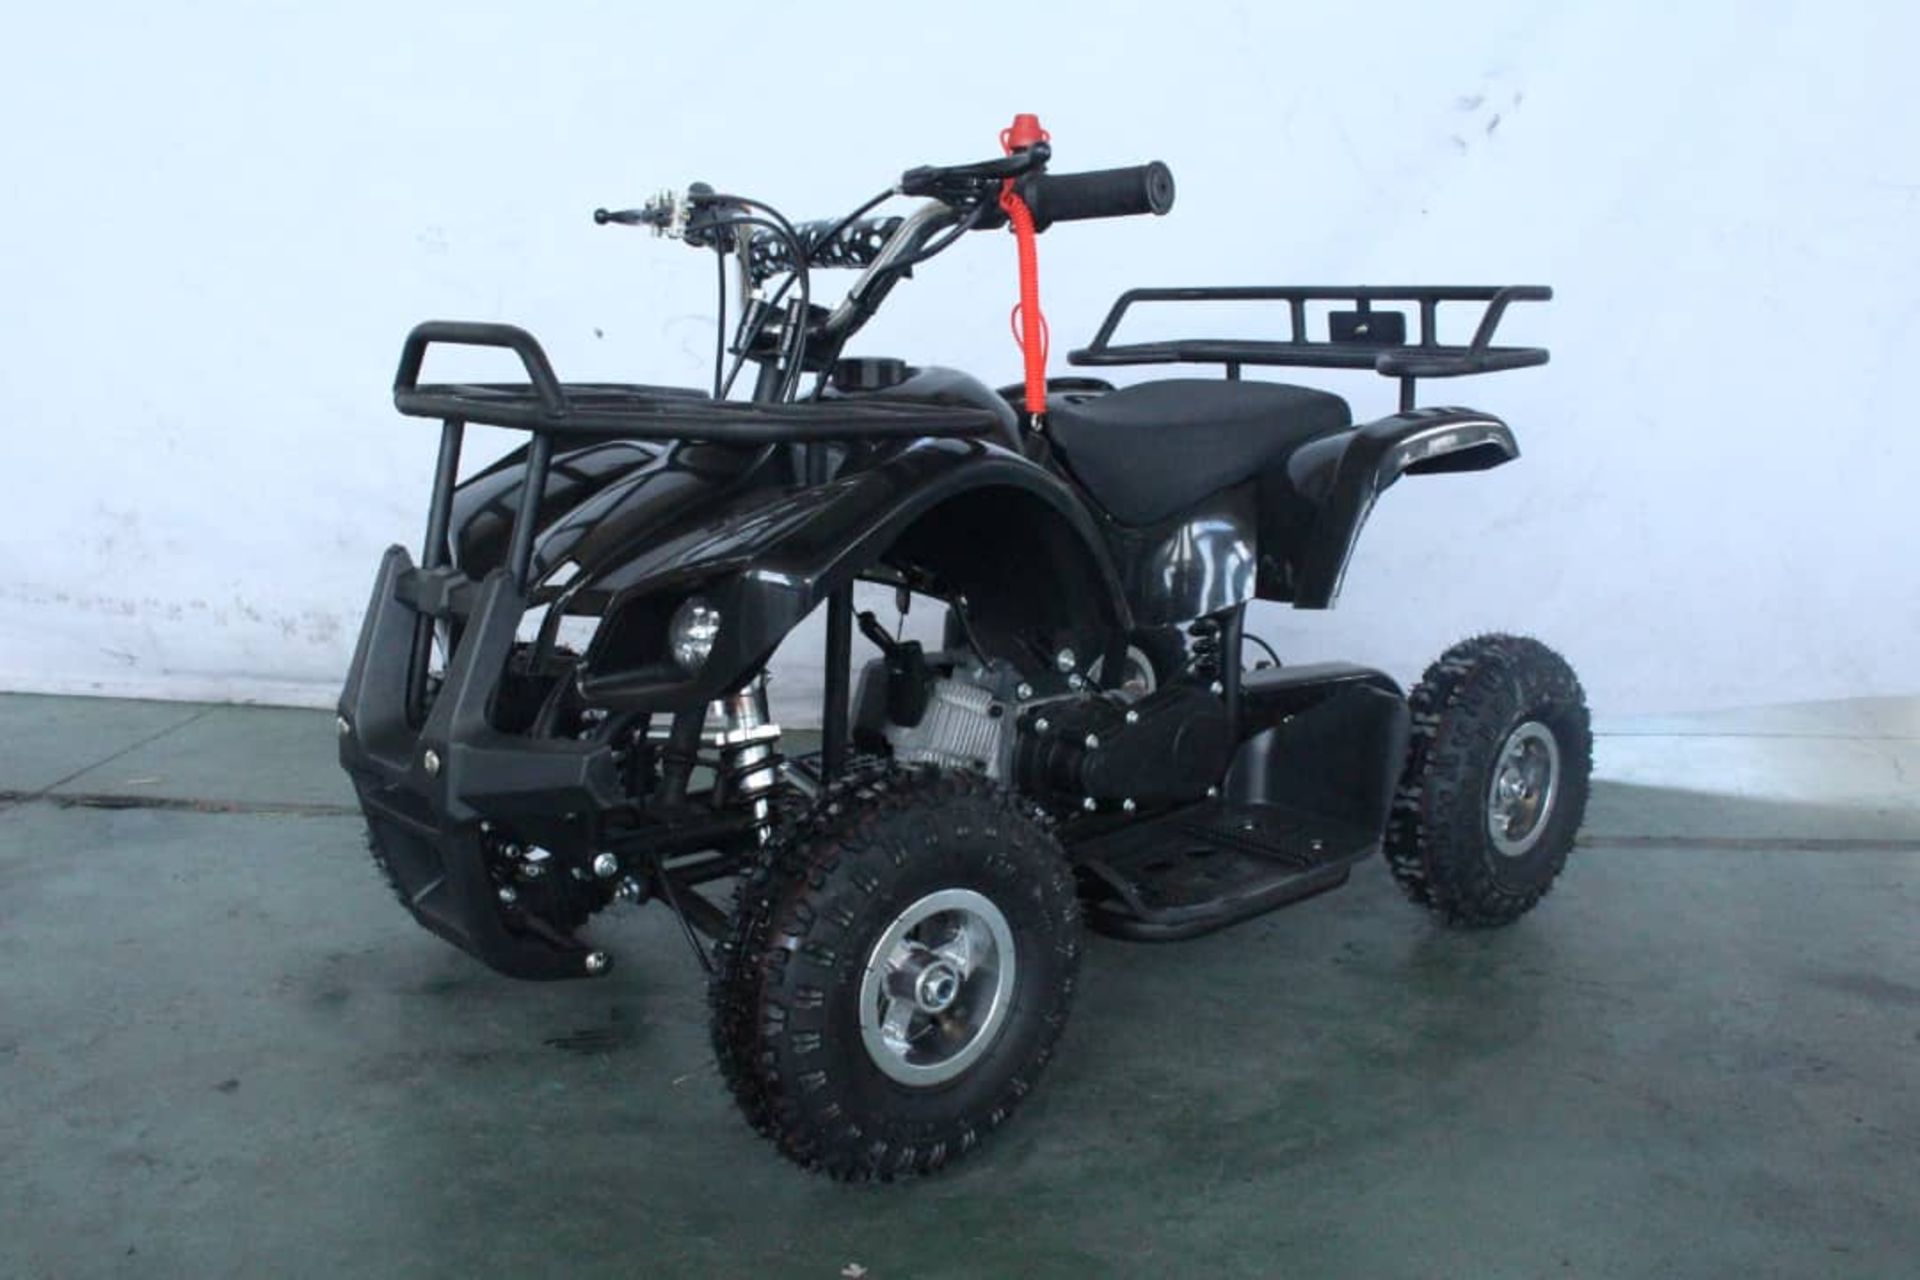 + VAT Brand New 49cc Hawk Mini Quad Bike - Colours May Vary - Full Front And Rear Suspension - Disk